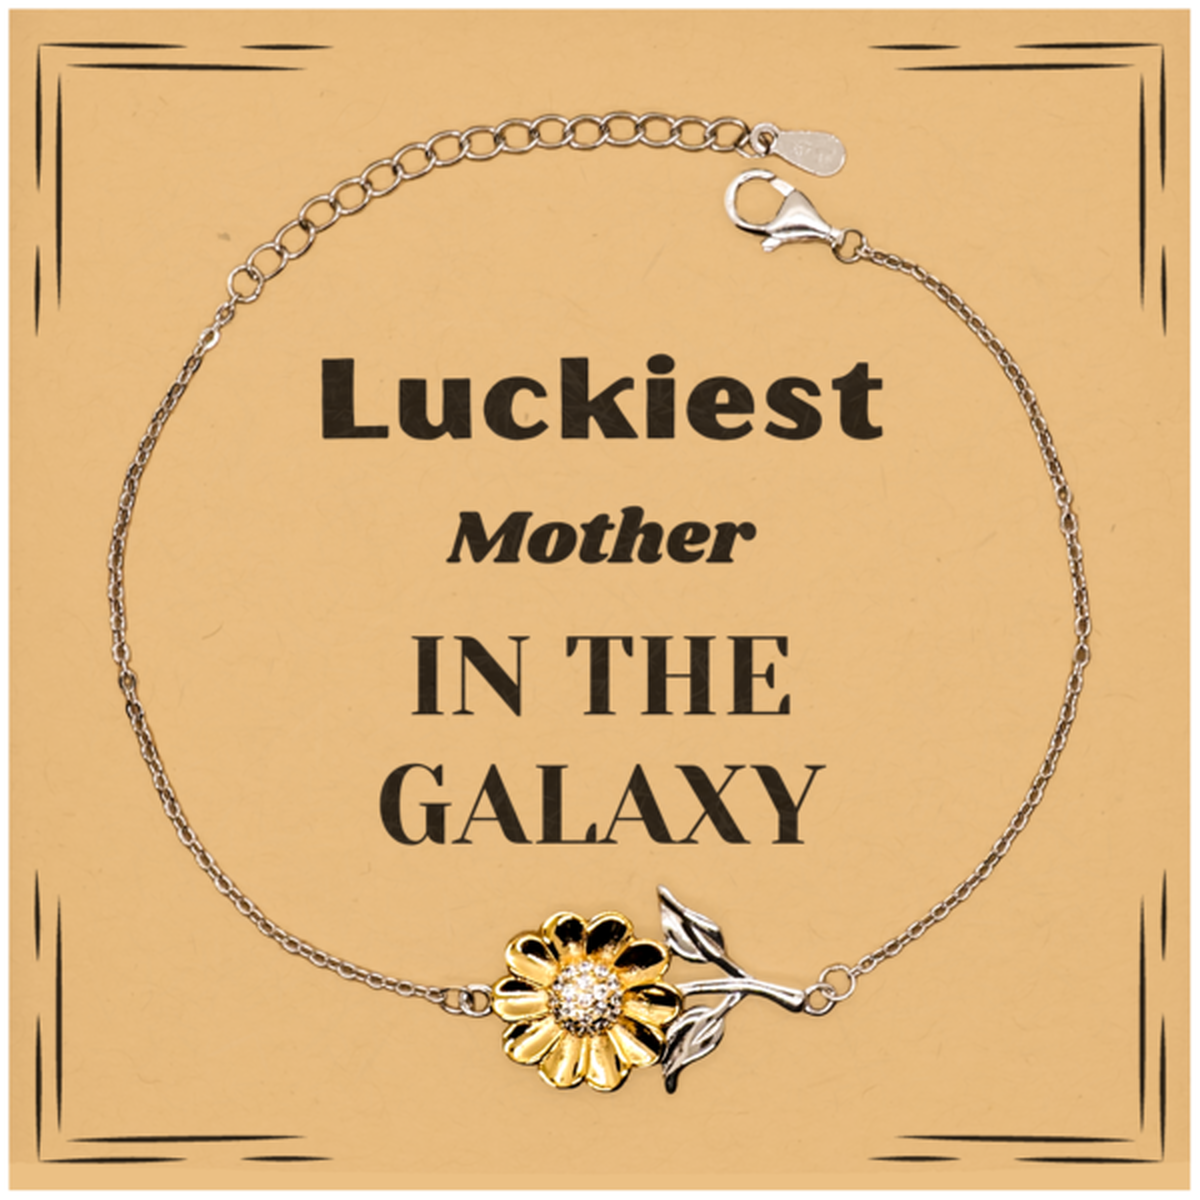 Luckiest Mother in the Galaxy, To My Mother Message Card Gifts, Christmas Mother Sunflower Bracelet Gifts, X-mas Birthday Unique Gifts For Mother Men Women